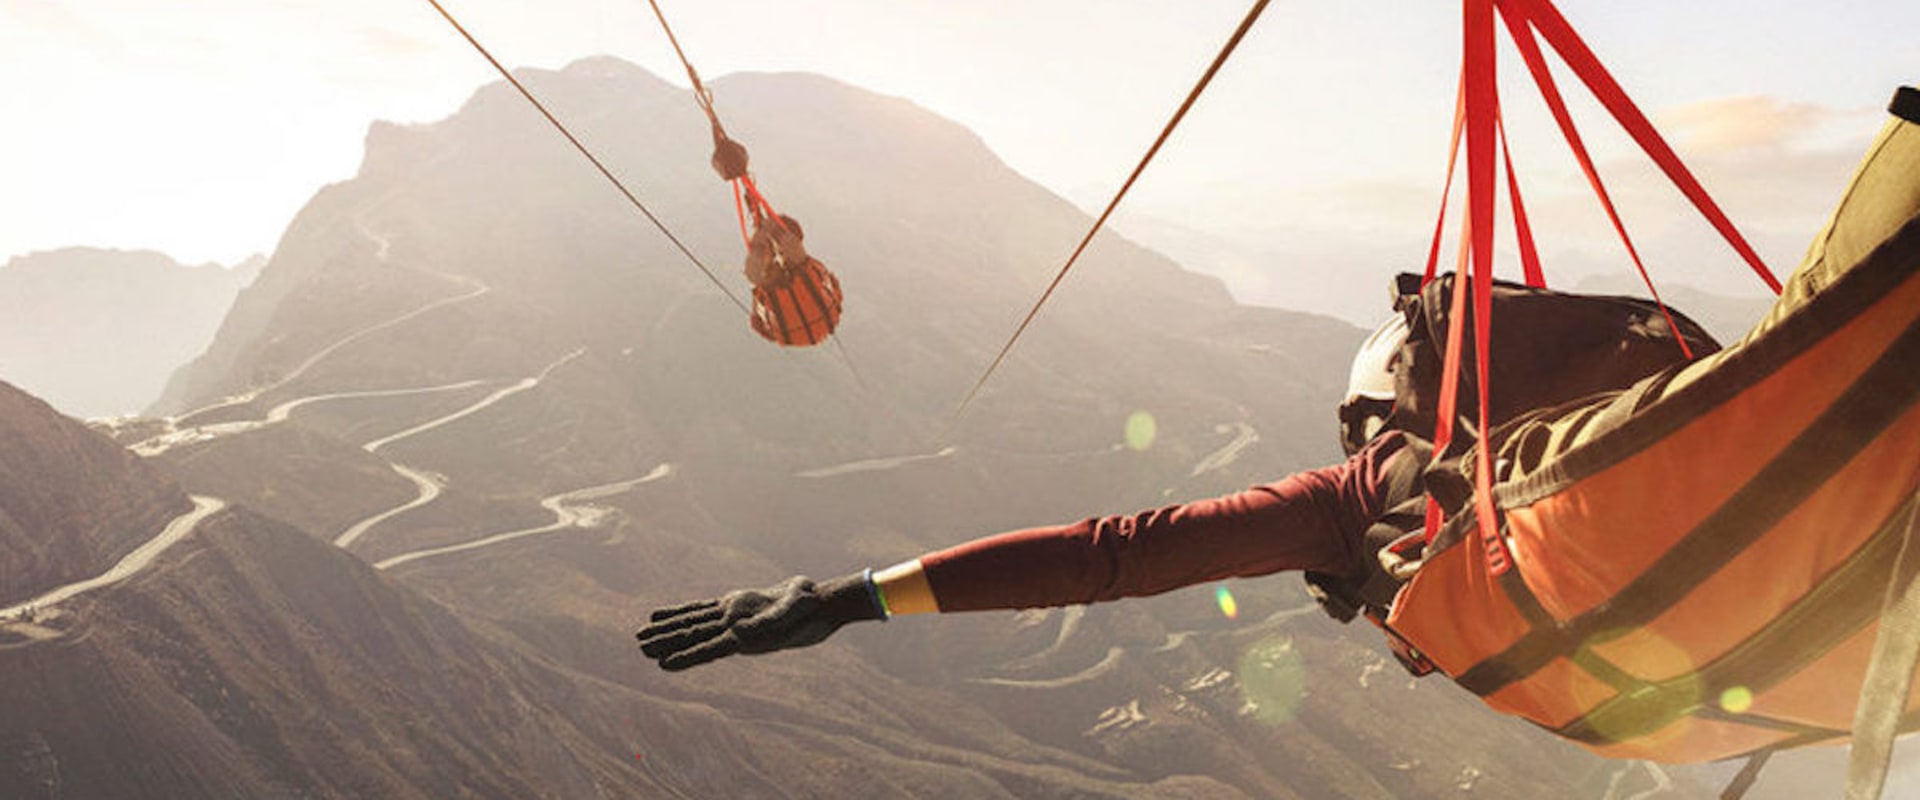 Where is the 2nd longest zipline in the world?